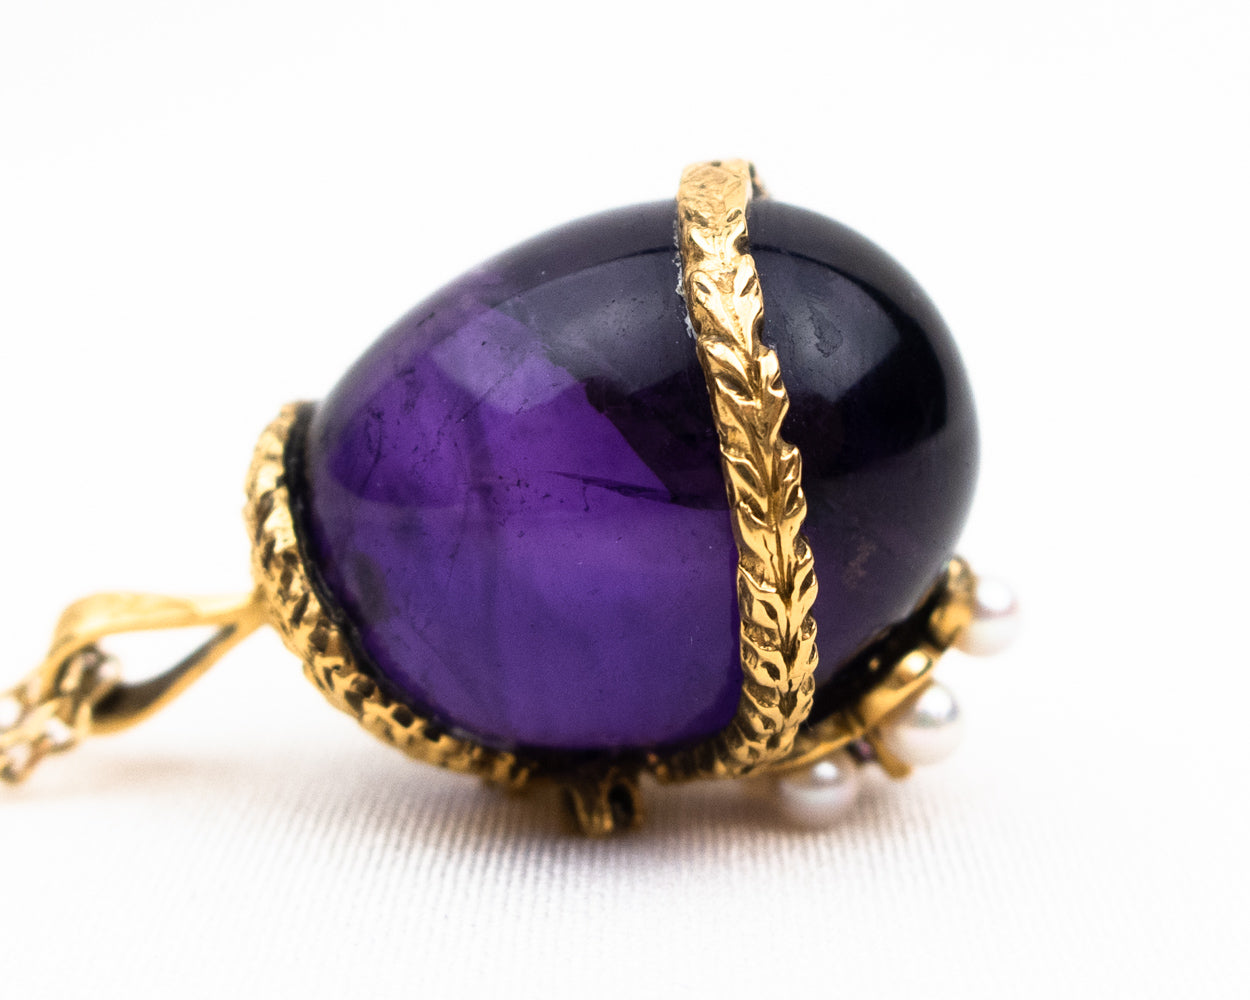 1980s Amethyst Egg-Shaped Pendant Necklace